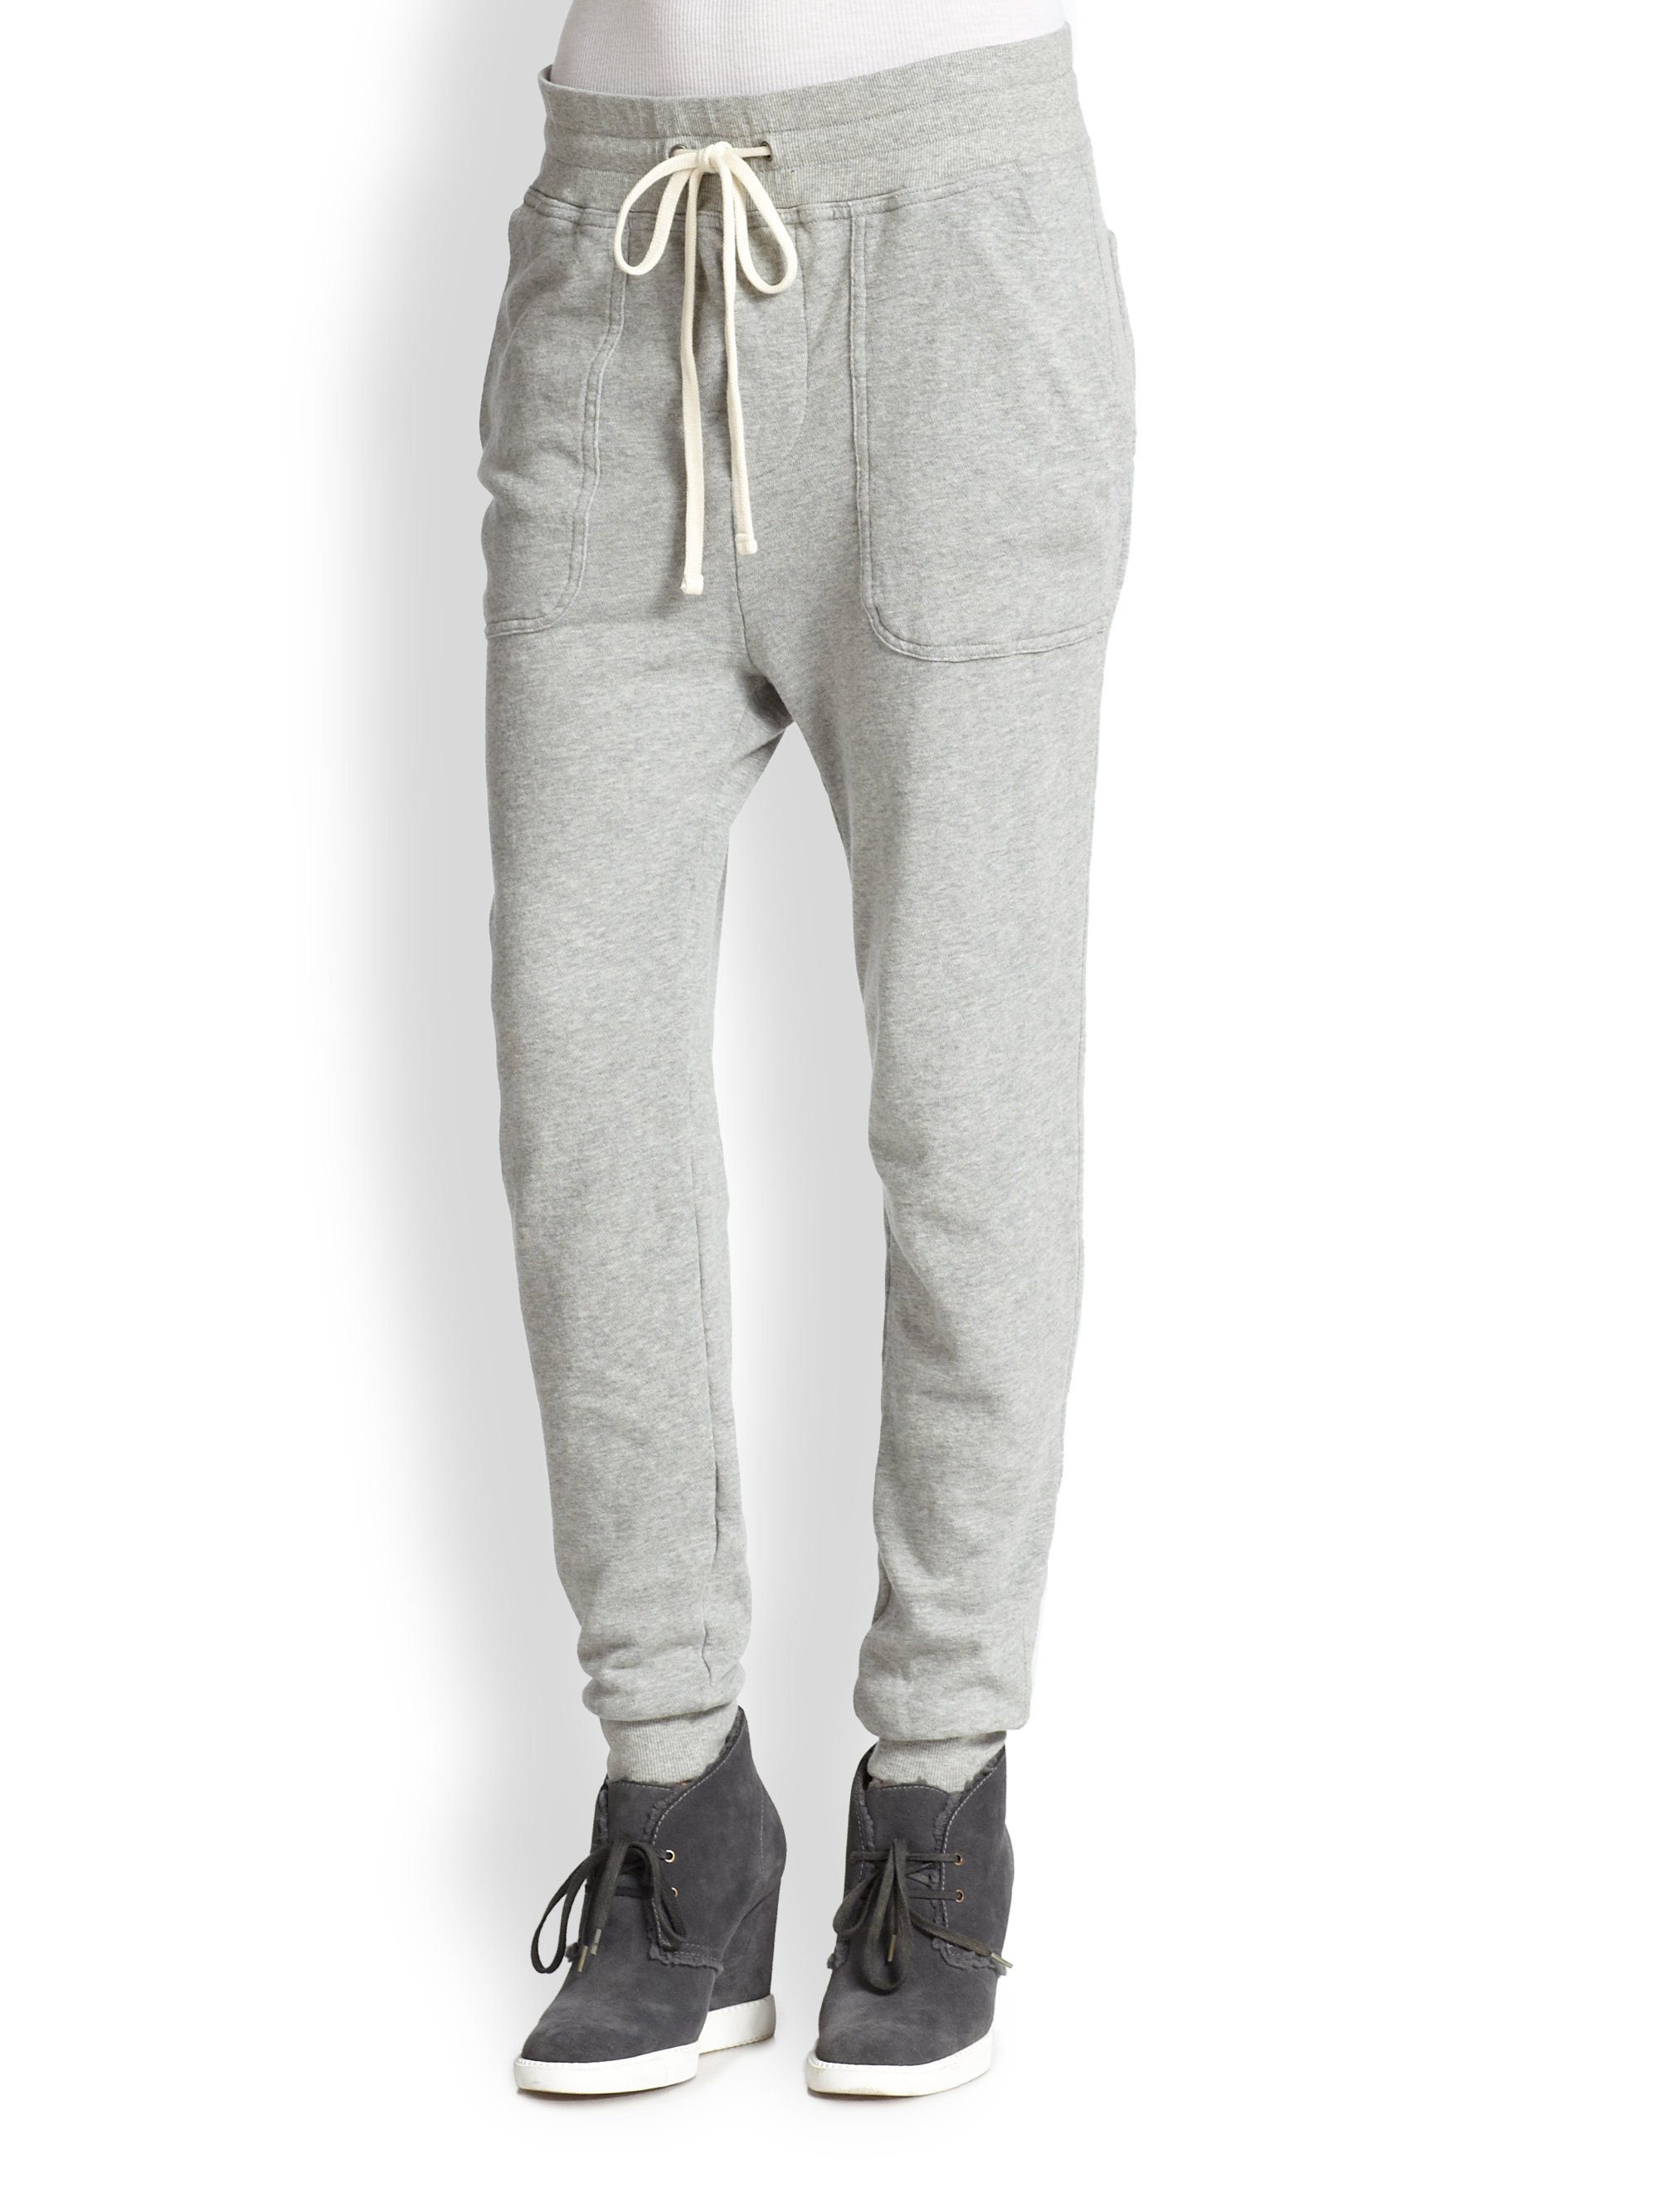 Lyst - James Perse Dropped-Rise Cotton French Terry Sweatpants in Gray